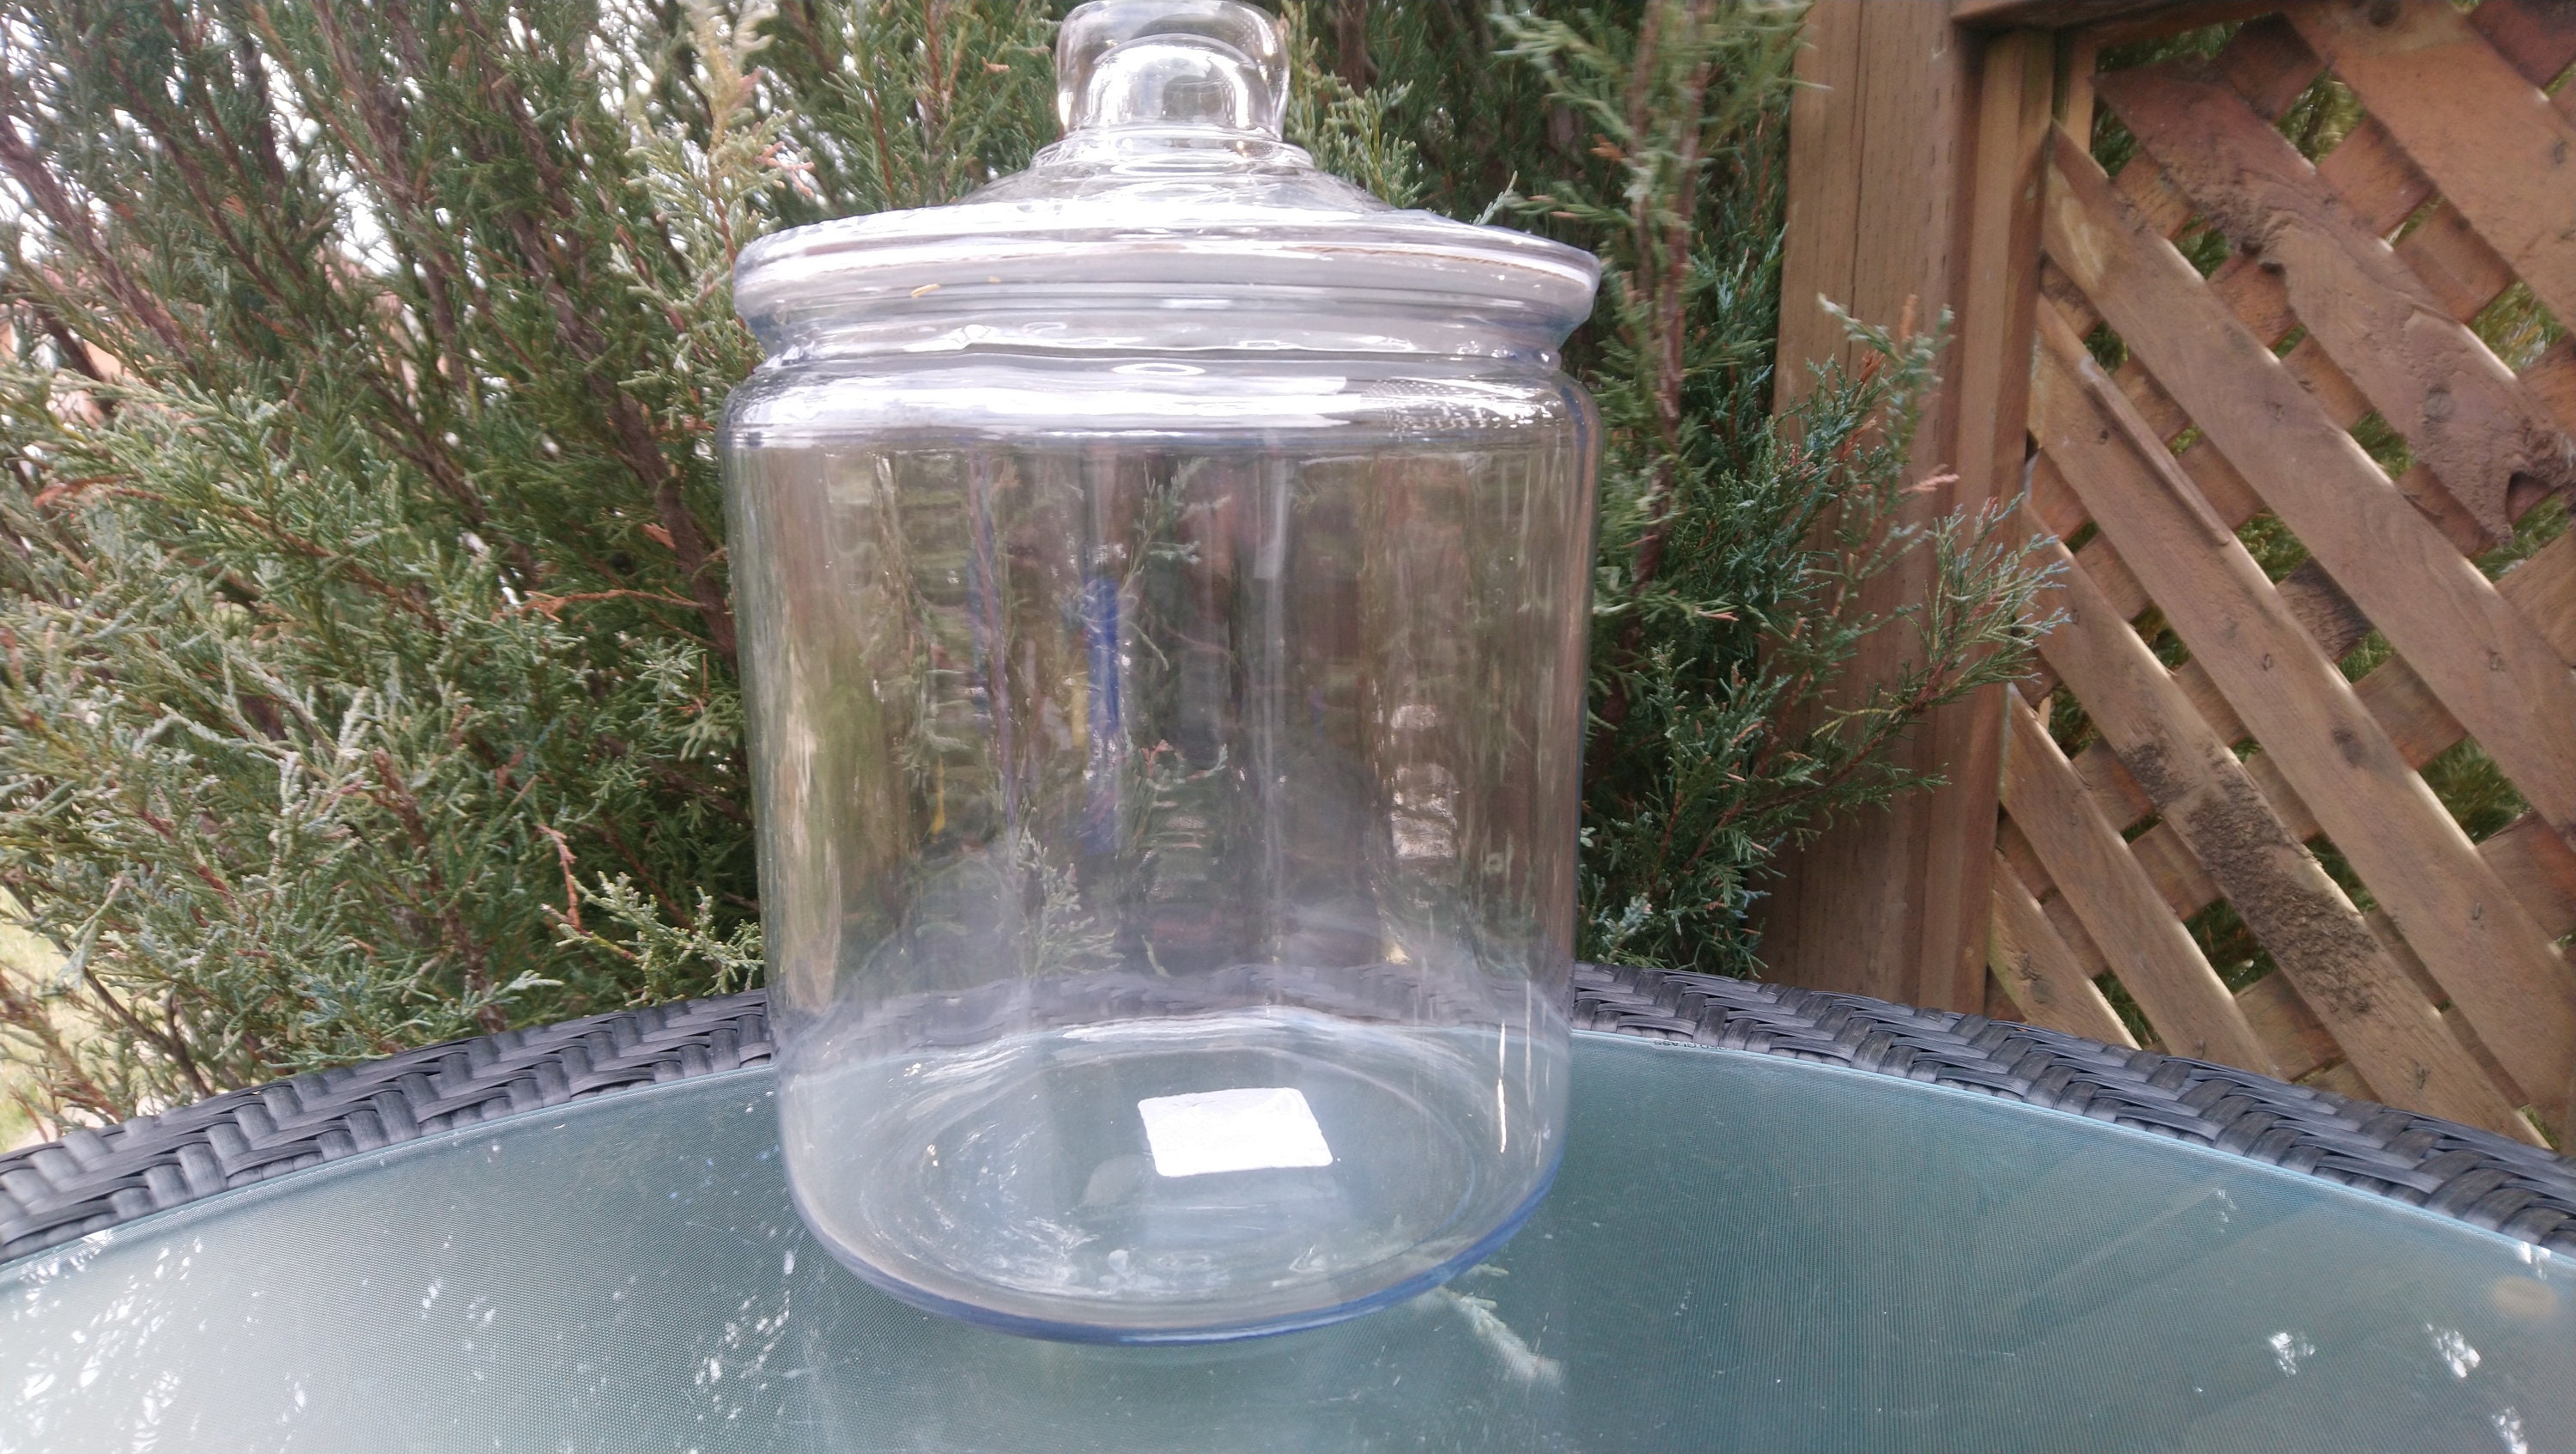 Vintage 1 ONE GALLON CLEAR GLASS JAR COOKIE JAR NO LID #470128 Canister